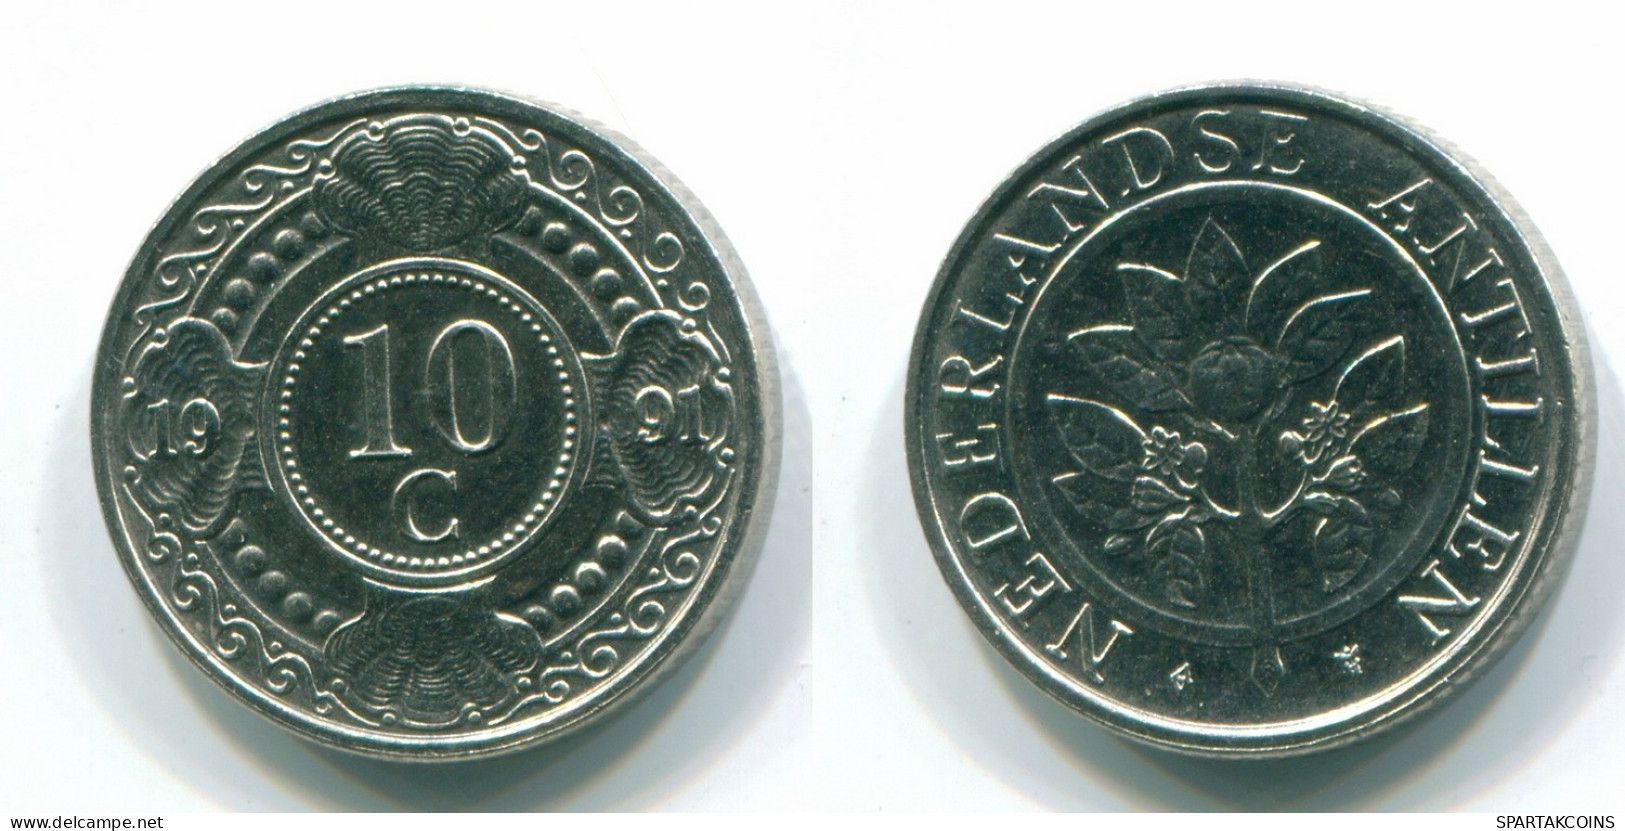 10 CENTS 1991 NETHERLANDS ANTILLES Nickel Colonial Coin #S11320.U.A - Netherlands Antilles